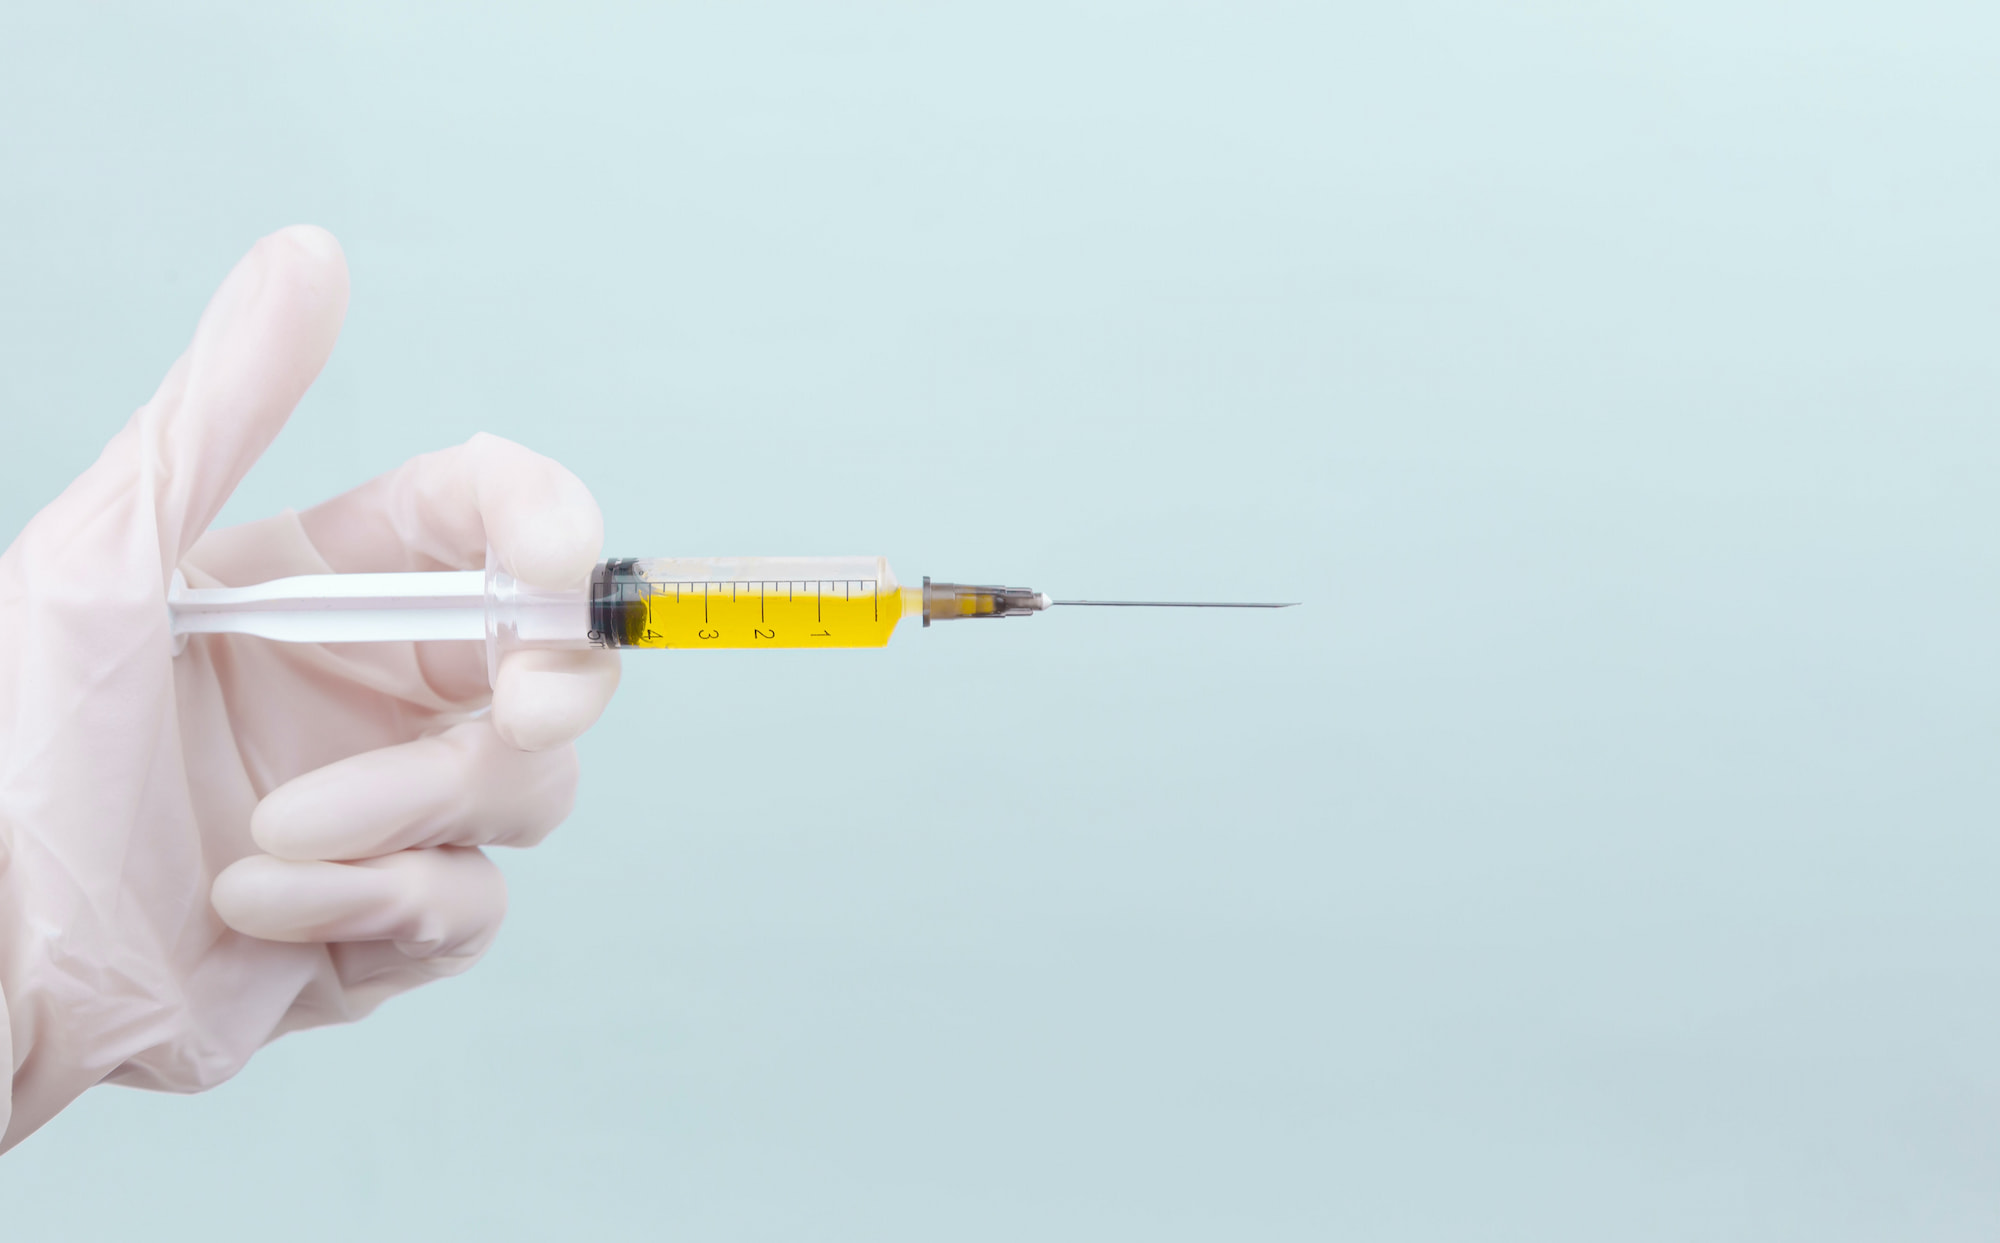 FDA may approve long-acting injectable PrEP by January